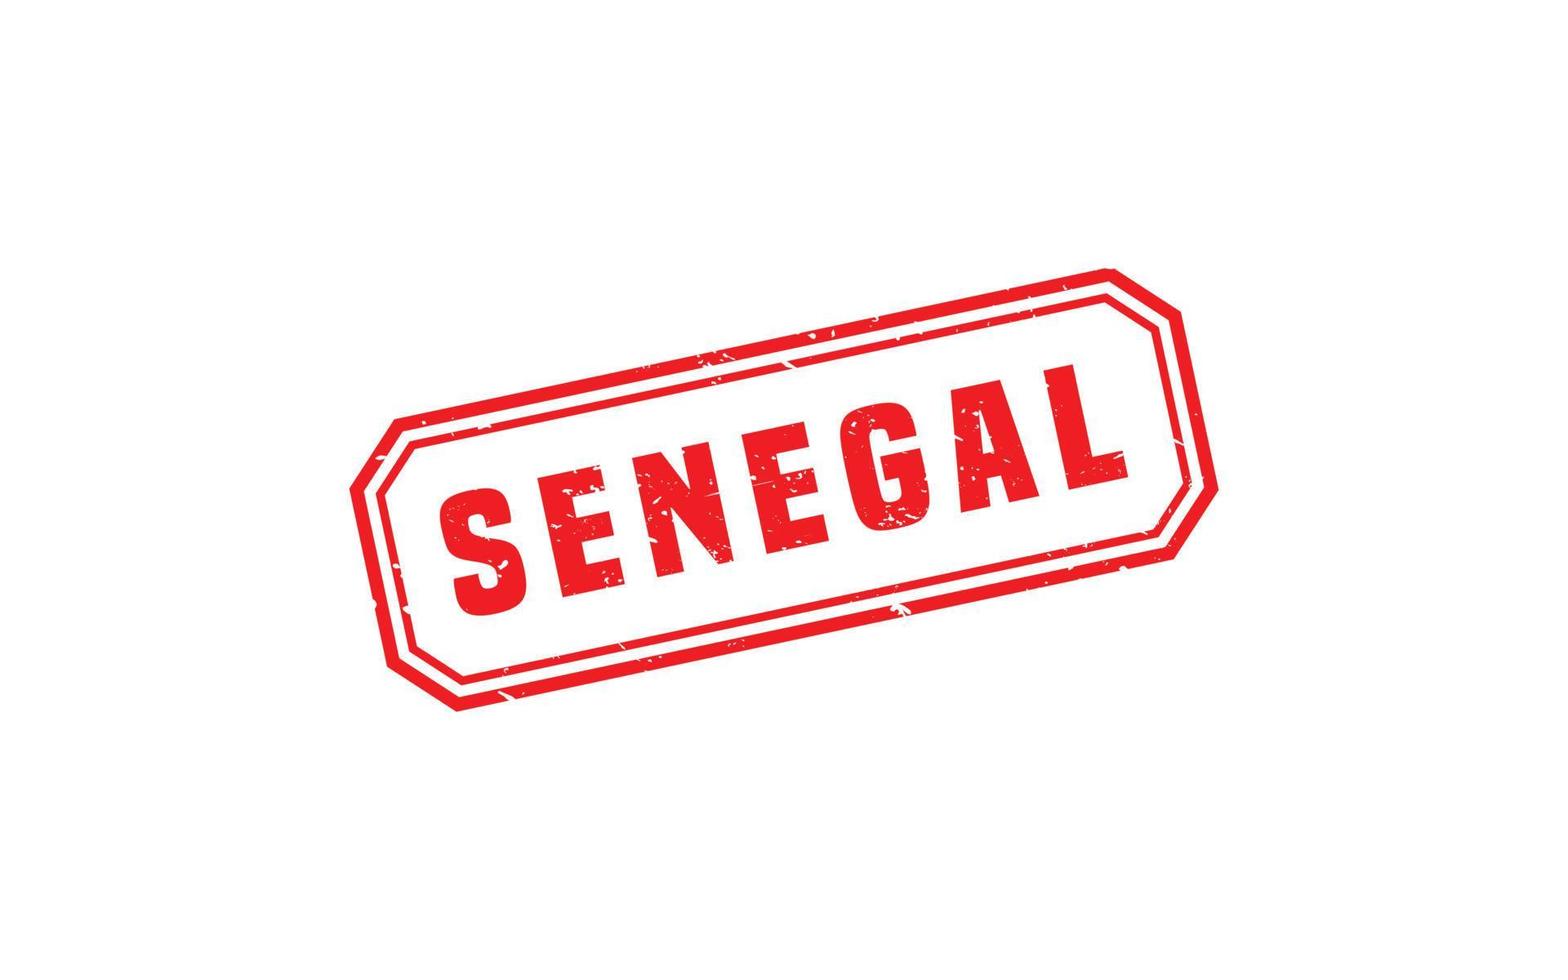 SENEGAL stamp rubber with grunge style on white background vector